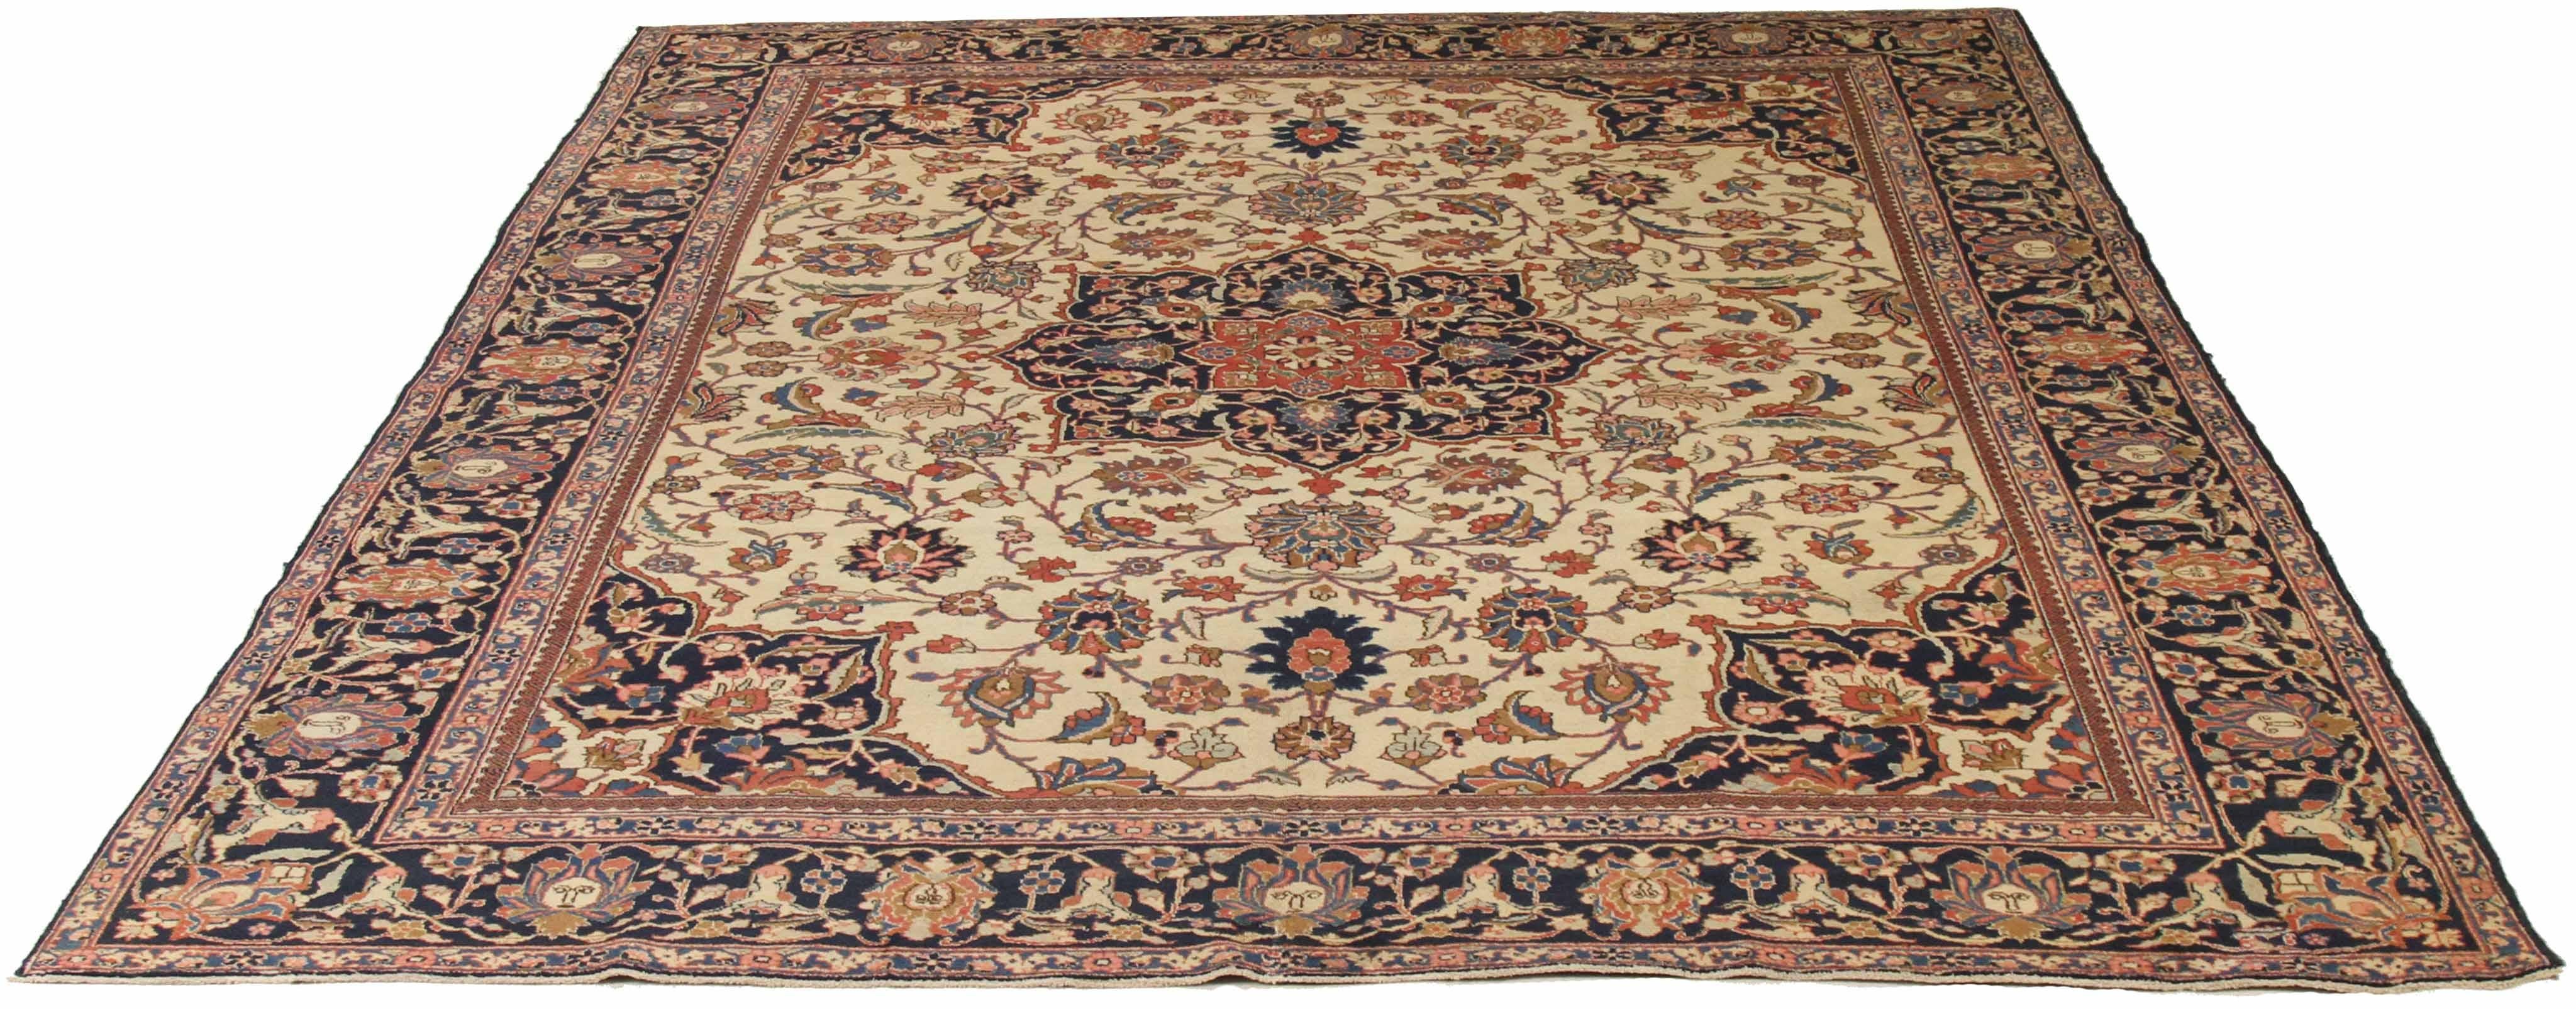 Antique Persian area rug handwoven from the finest sheep’s wool. It’s colored with all-natural vegetable dyes that are safe for humans and pets. It’s a traditional Tabriz design handwoven by expert artisans. It’s a lovely area rug that can be